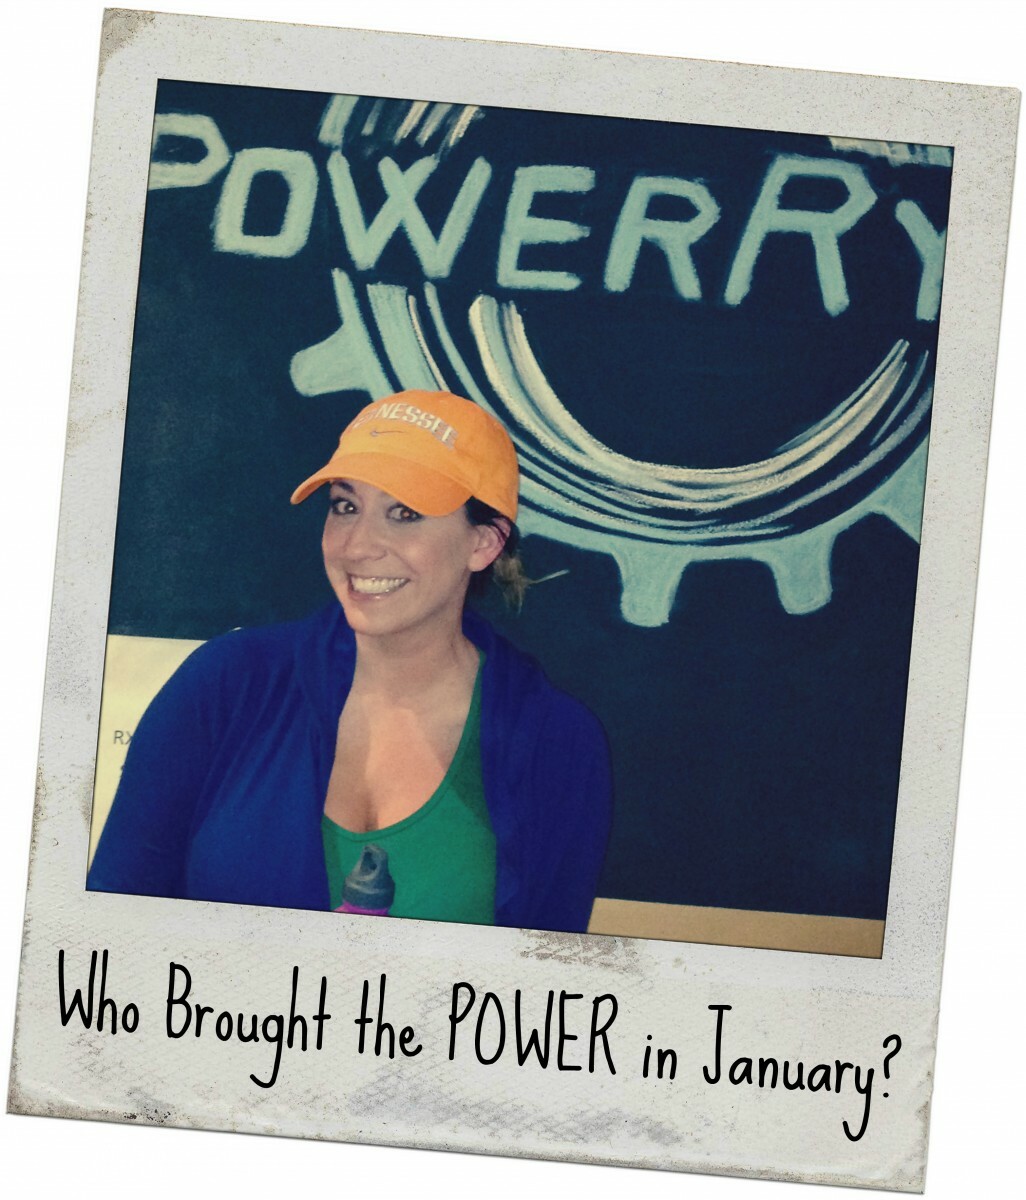 Polaroid style picture of Amy Lipcius with 'Who Brought the POWER in 'January'?